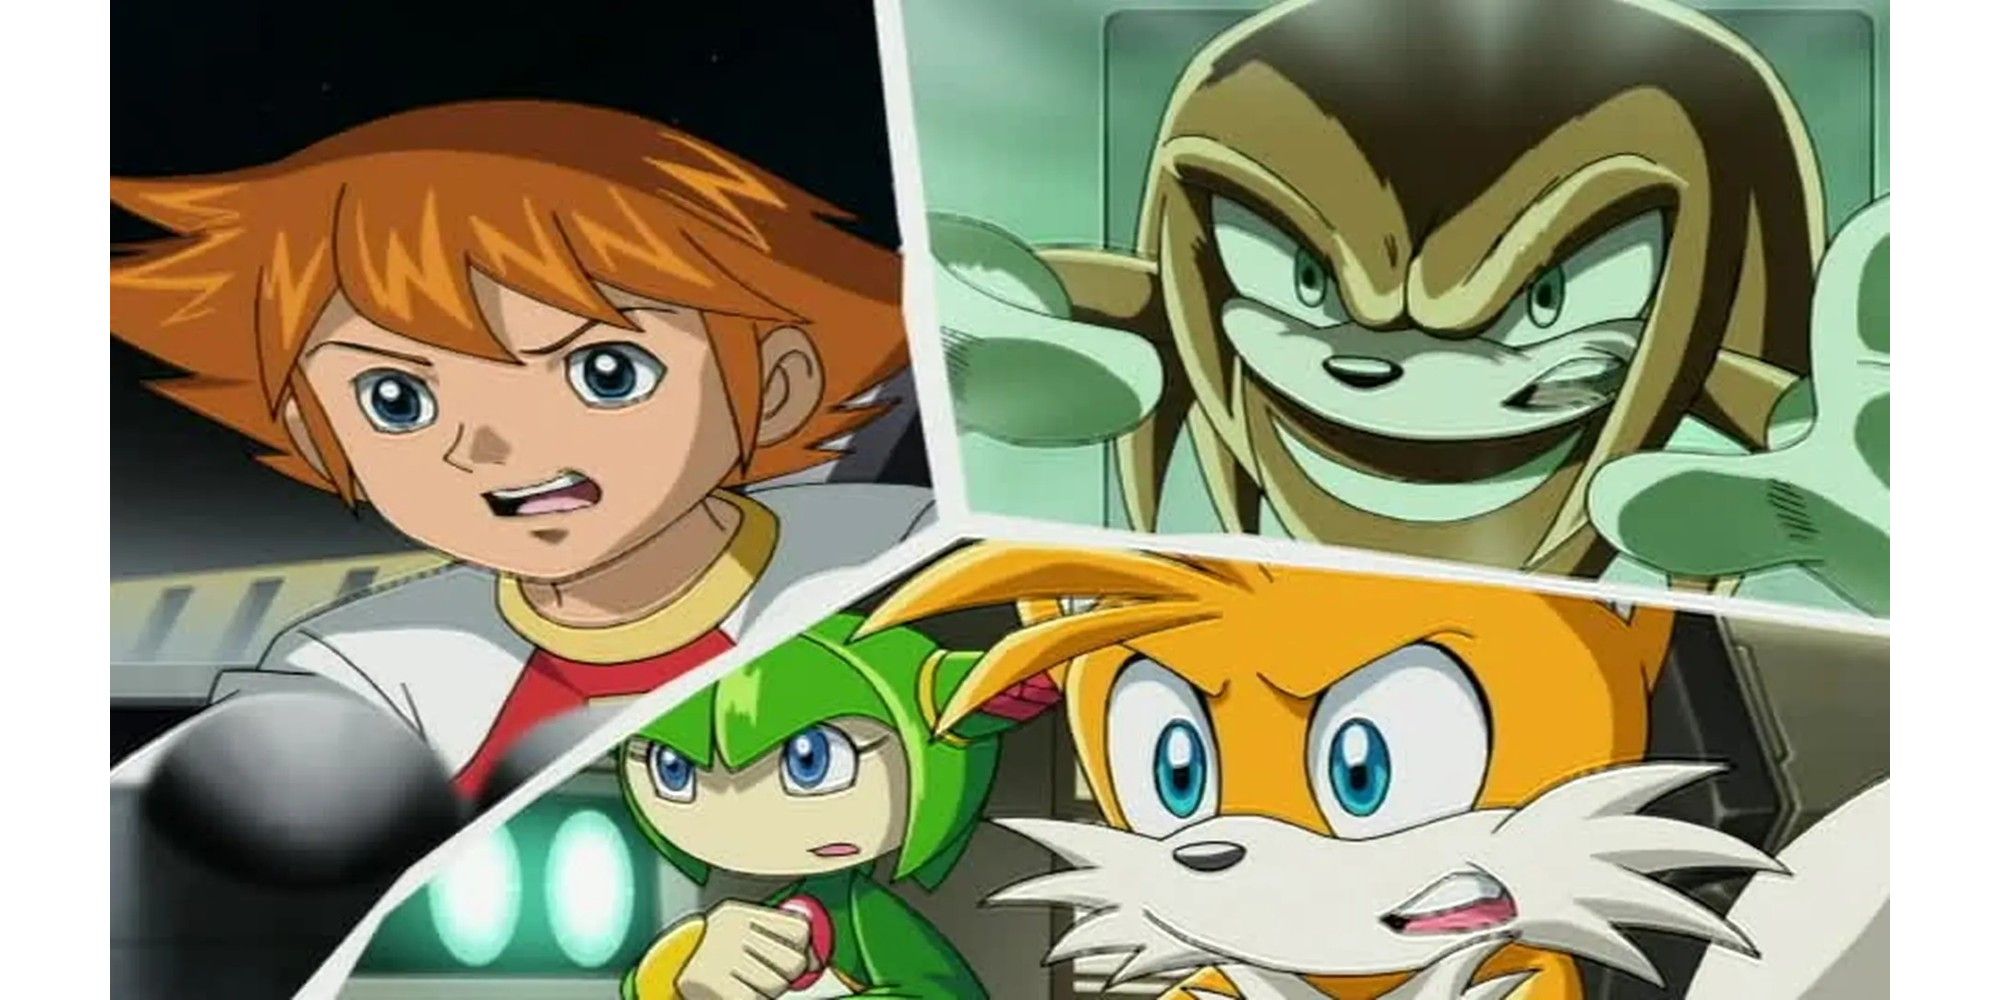 (left to right) Chris, Cosmo, Tails and Knuckles from Sonic x 